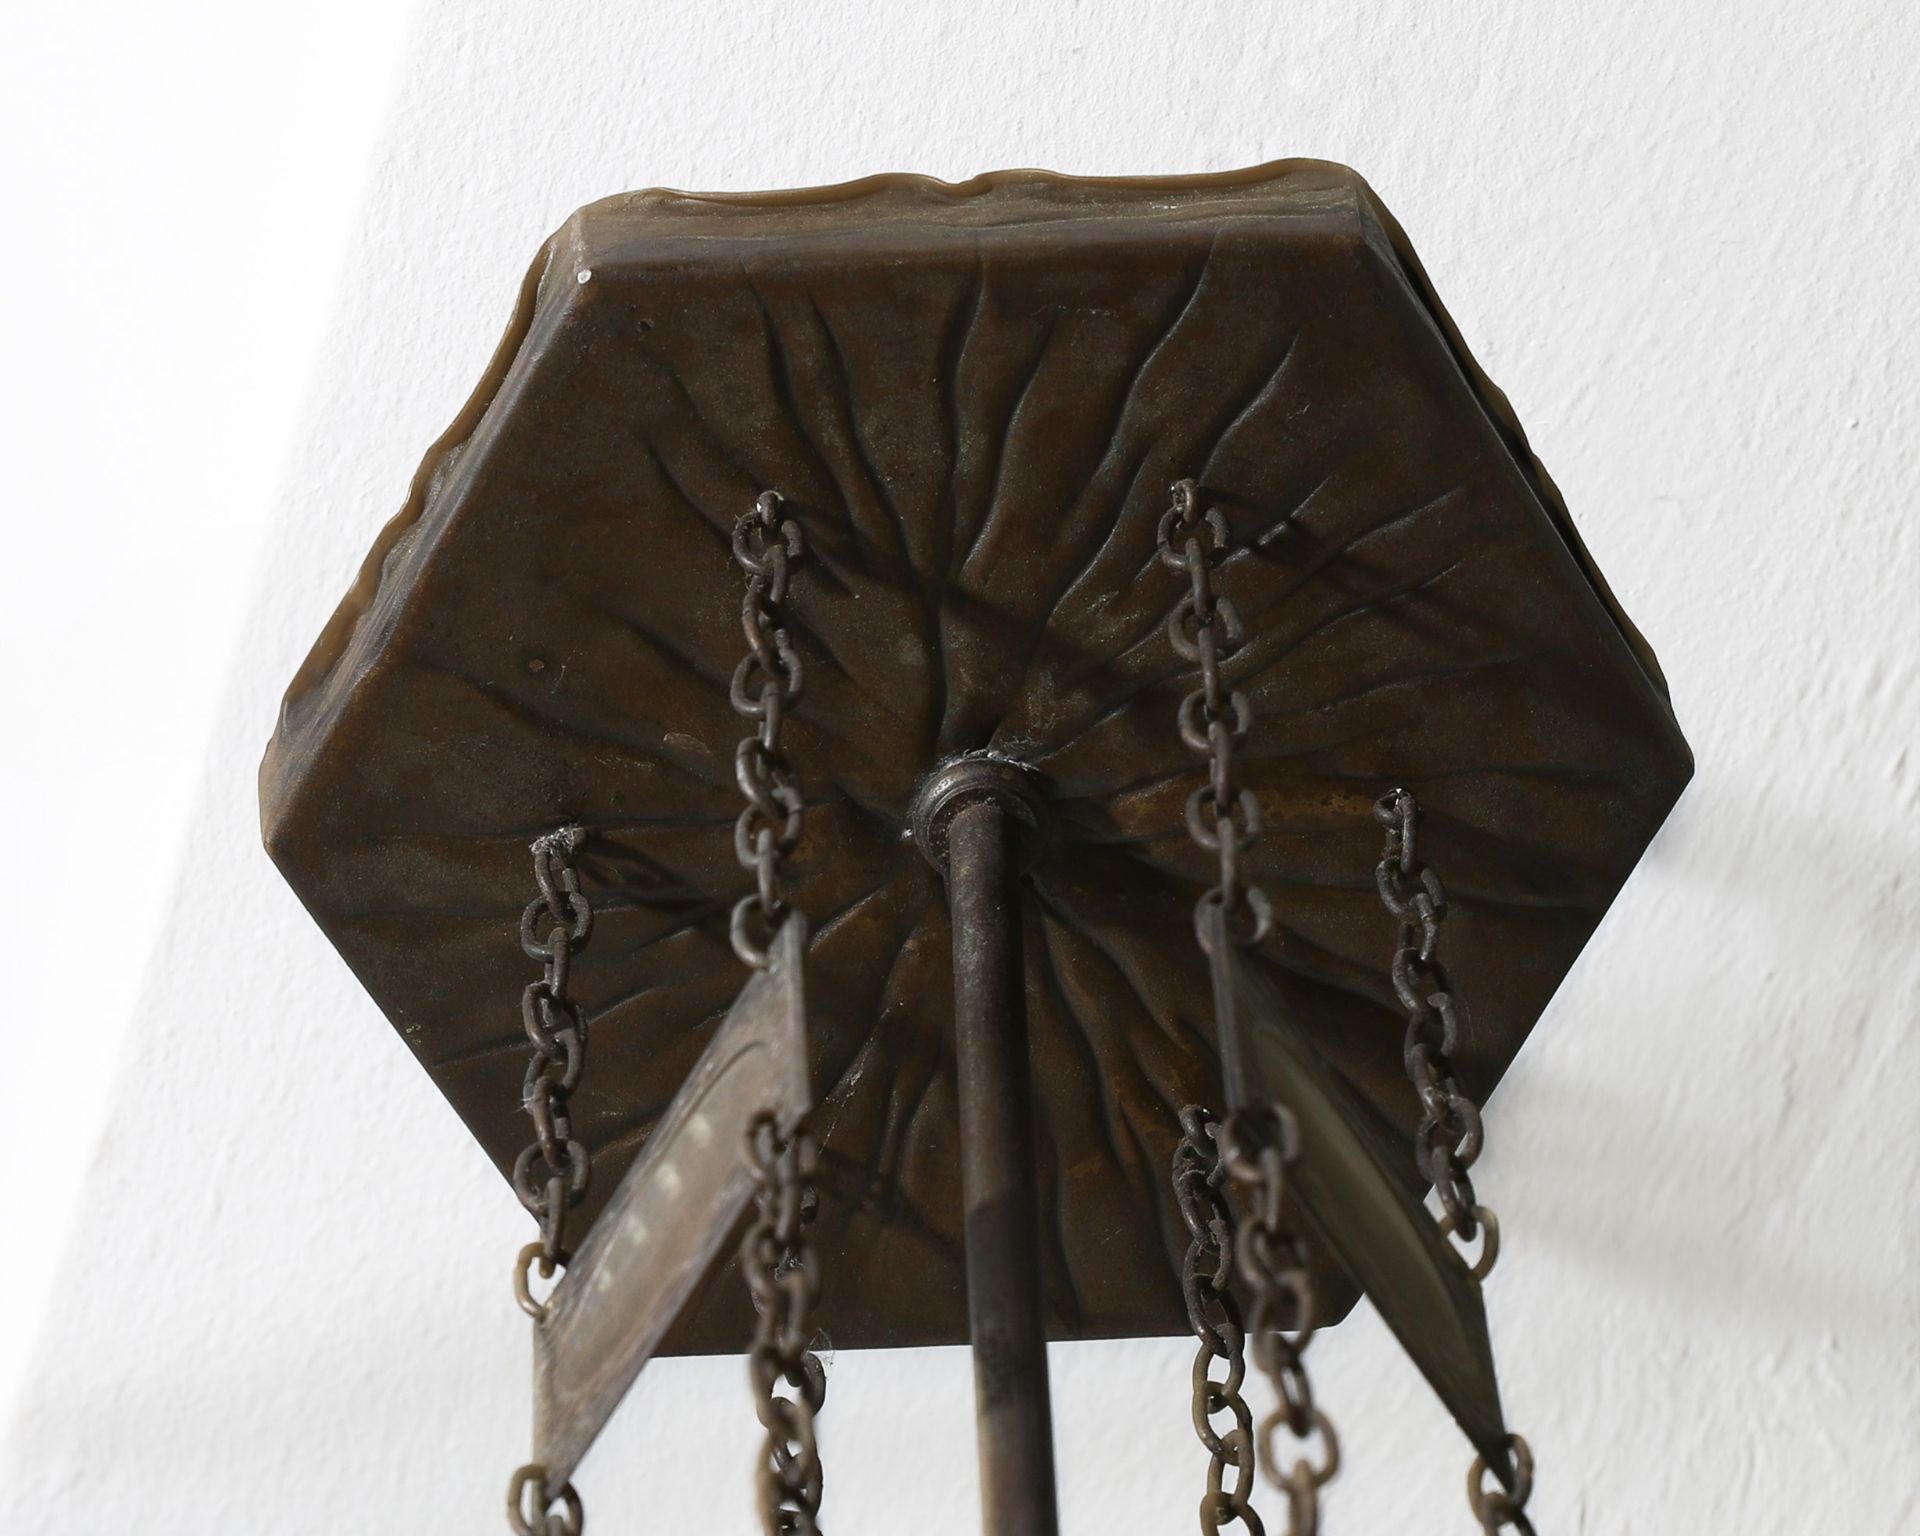 Art Nouveau hanging Lamp, metal, glass, probably Berlin around 1900 - Image 4 of 4